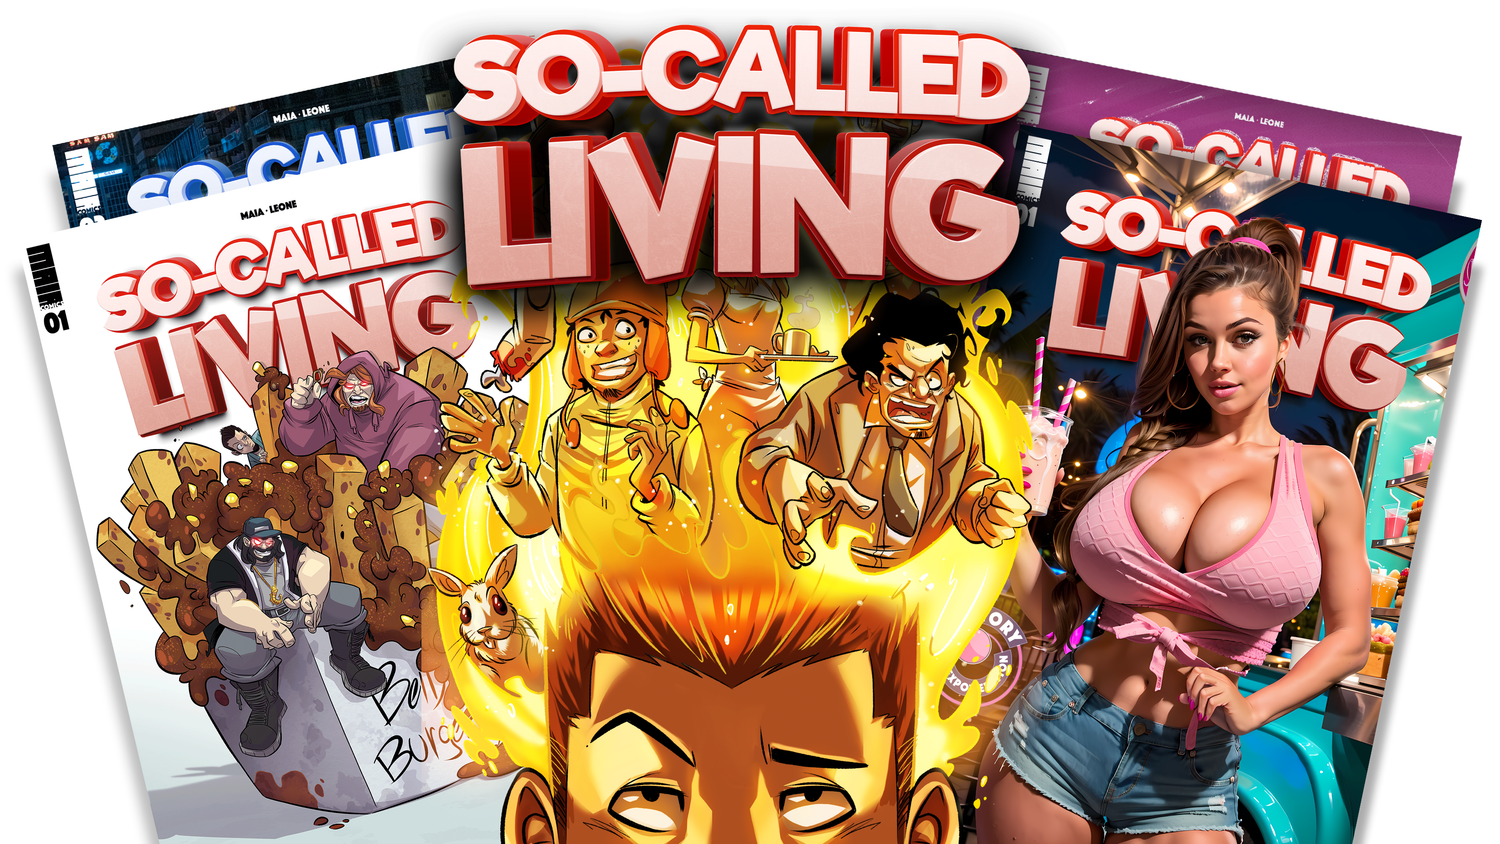 So-Called Living Books 1 & 2 with variant covers